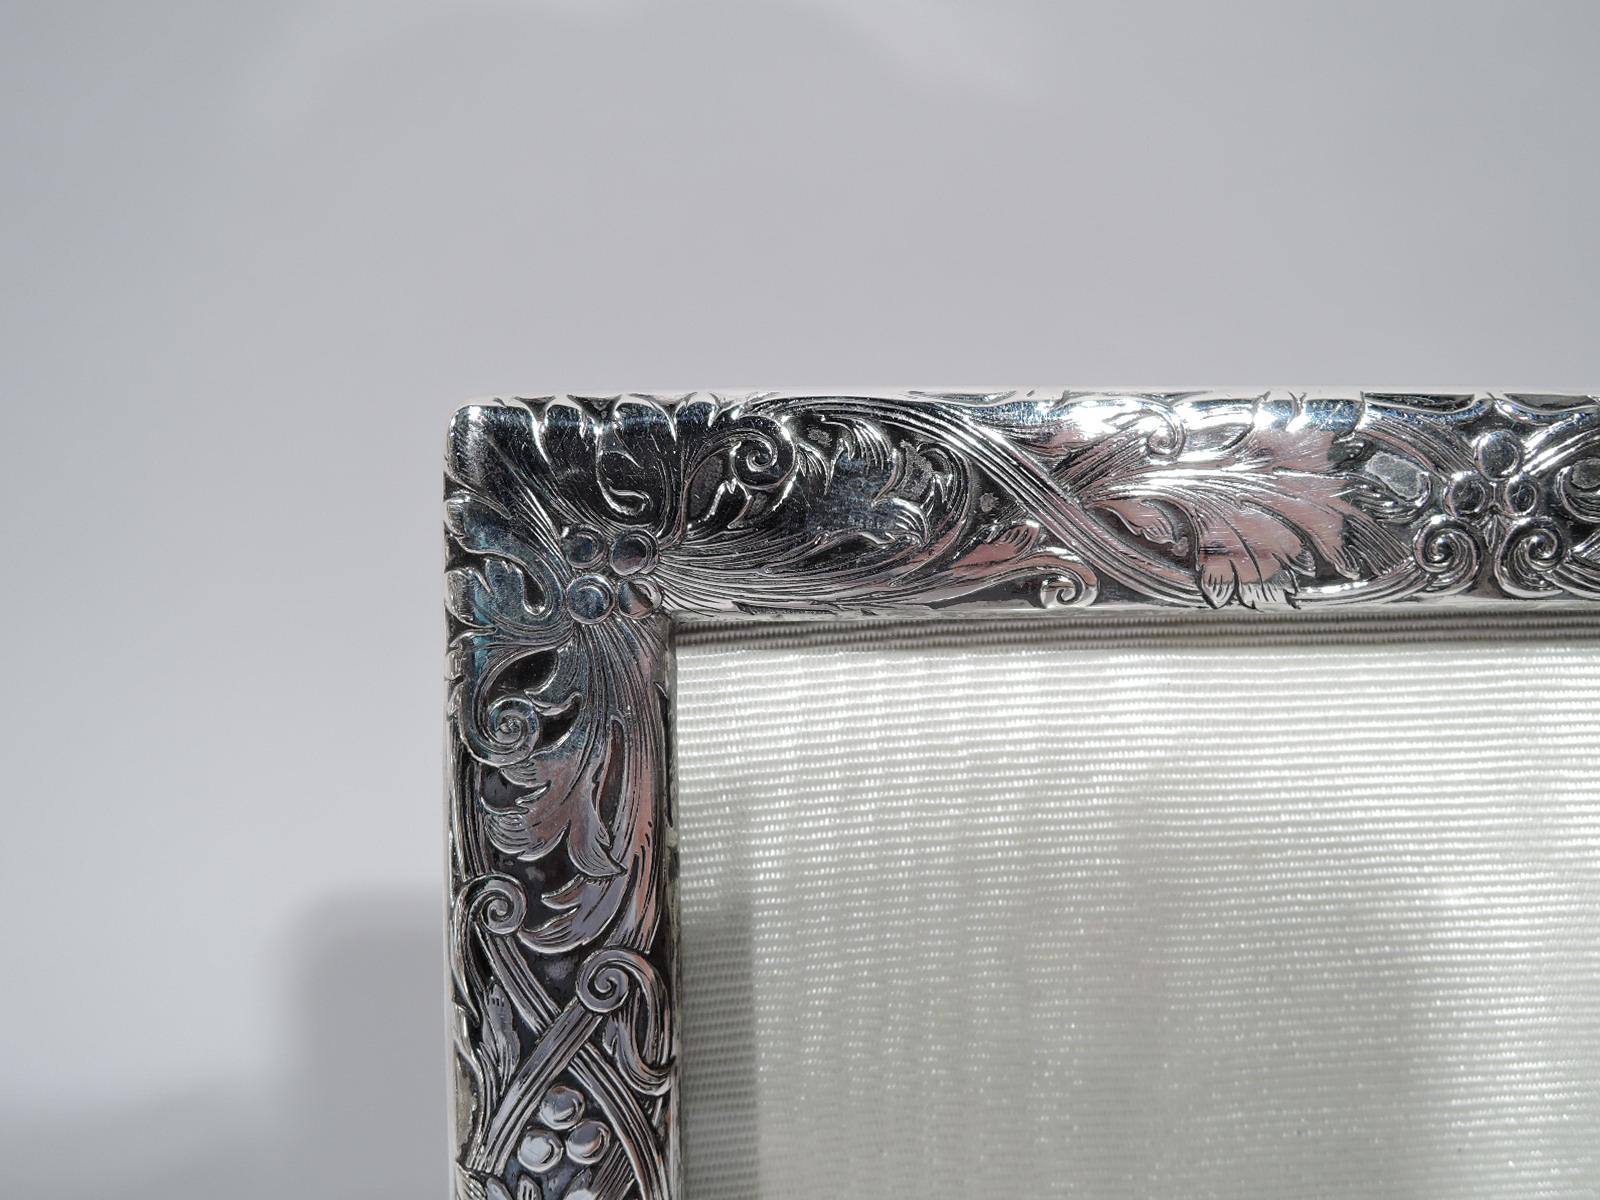 Edwardian Art Nouveau sterling silver picture frame. Made by William B. Kerr in Newark, circa 1910. Rectangular window in surround with acid-etched ornament: Leaves and berries threaded through and entwined with double scrolling bands. Rectangular